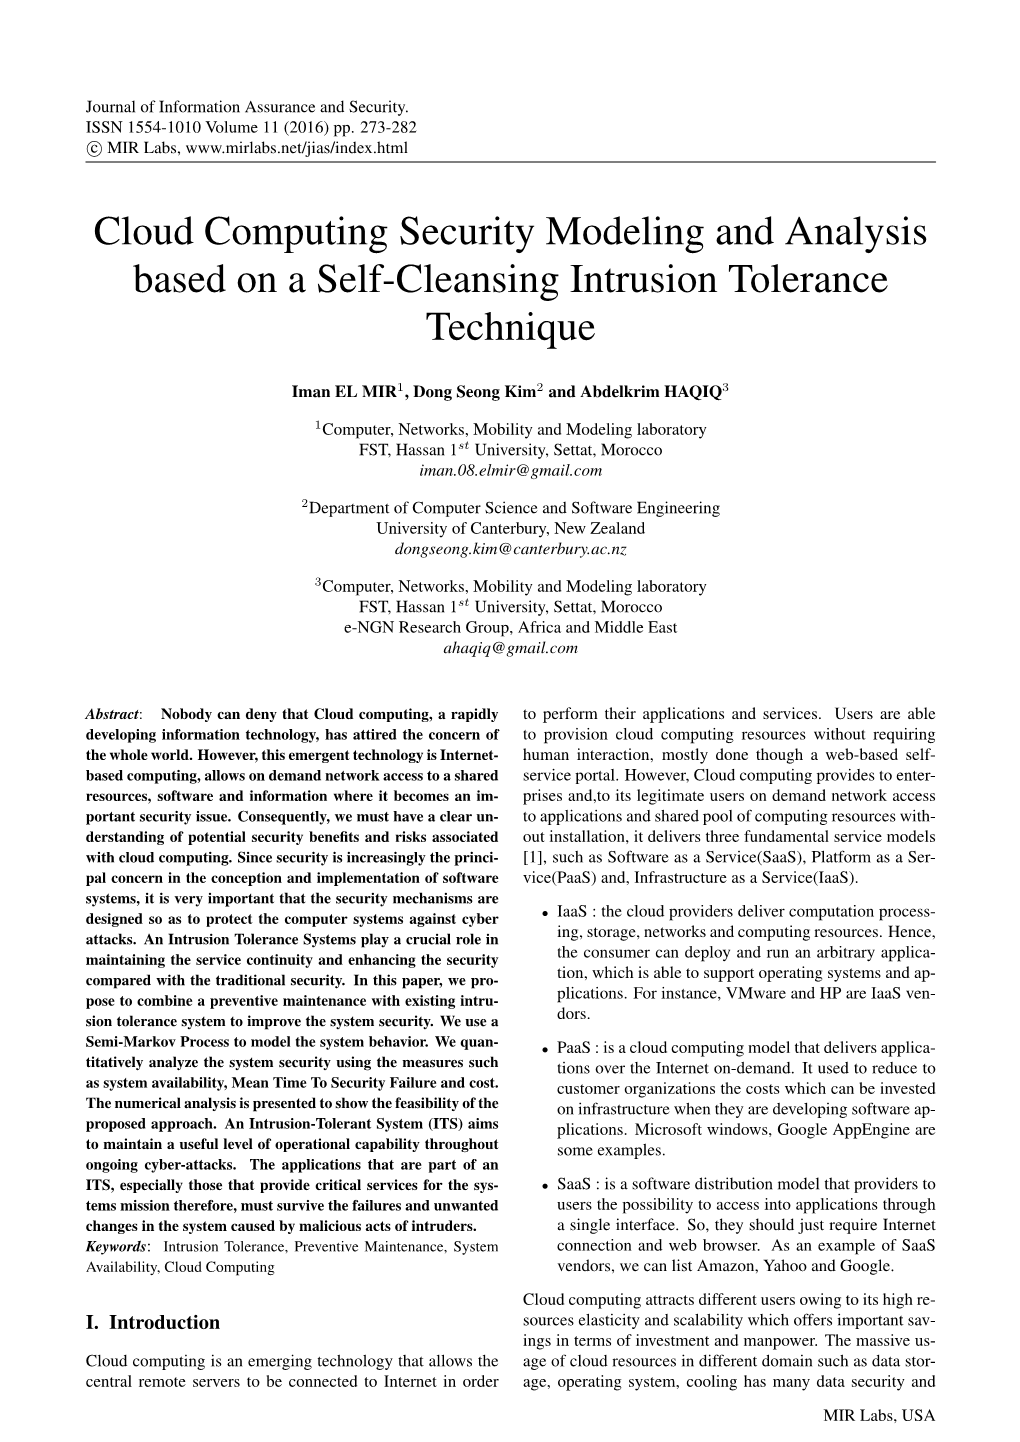 Cloud Computing Security Modeling and Analysis Based on a Self-Cleansing Intrusion Tolerance Technique